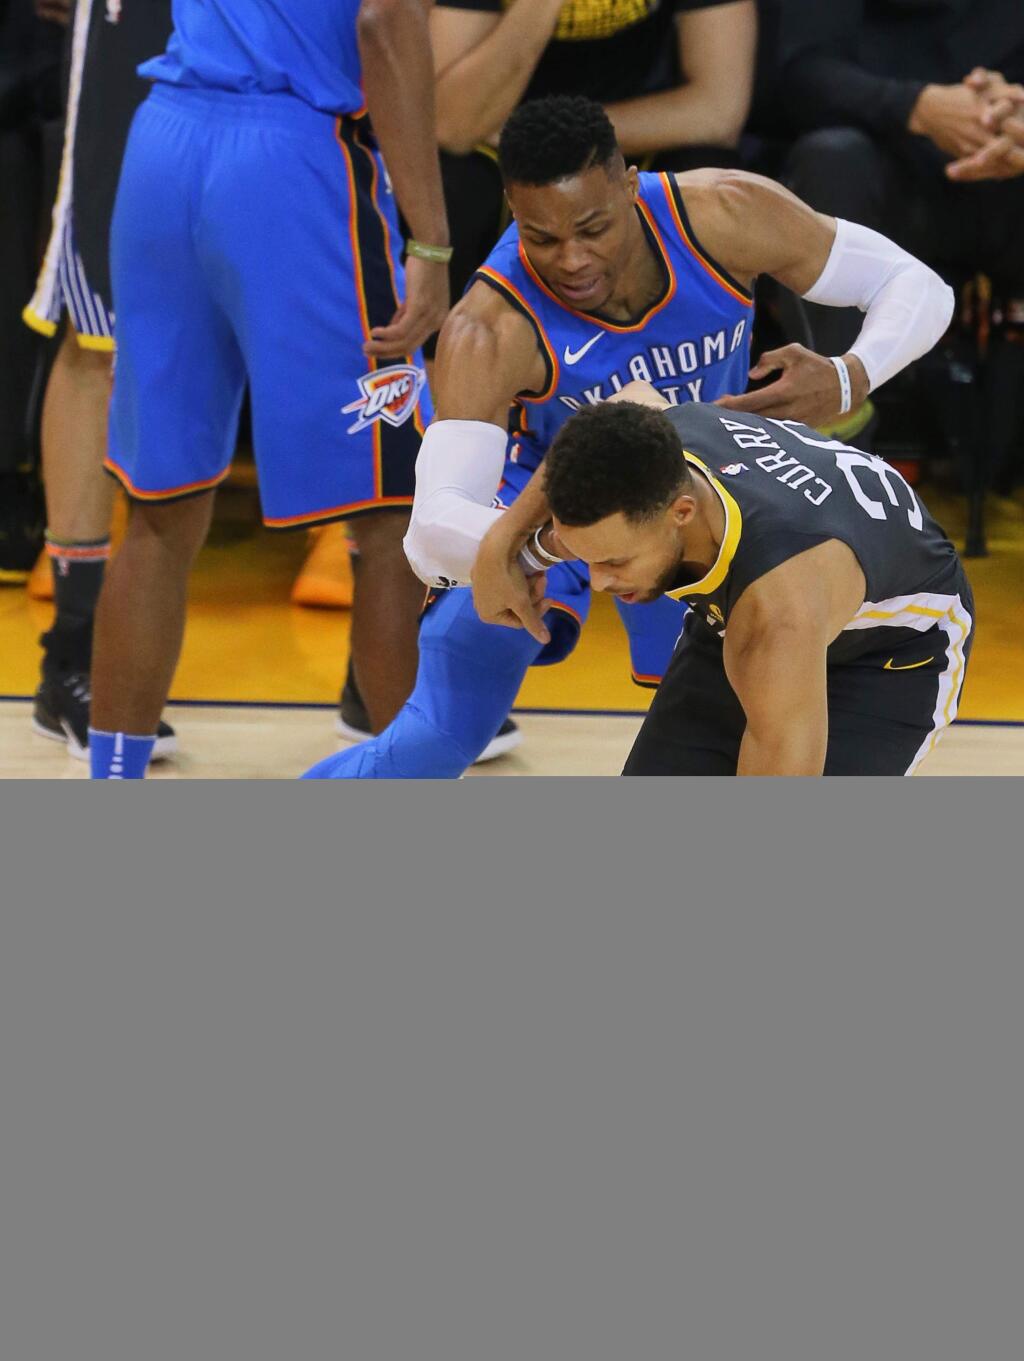 Golden State Warriors guard Stephen Curry loses the ball while trying to drive past Oklahoma City Thunder guard Russell Westbrook in Oakland on Tuesday, February 6, 2018. (Christopher Chung/ The Press Democrat)